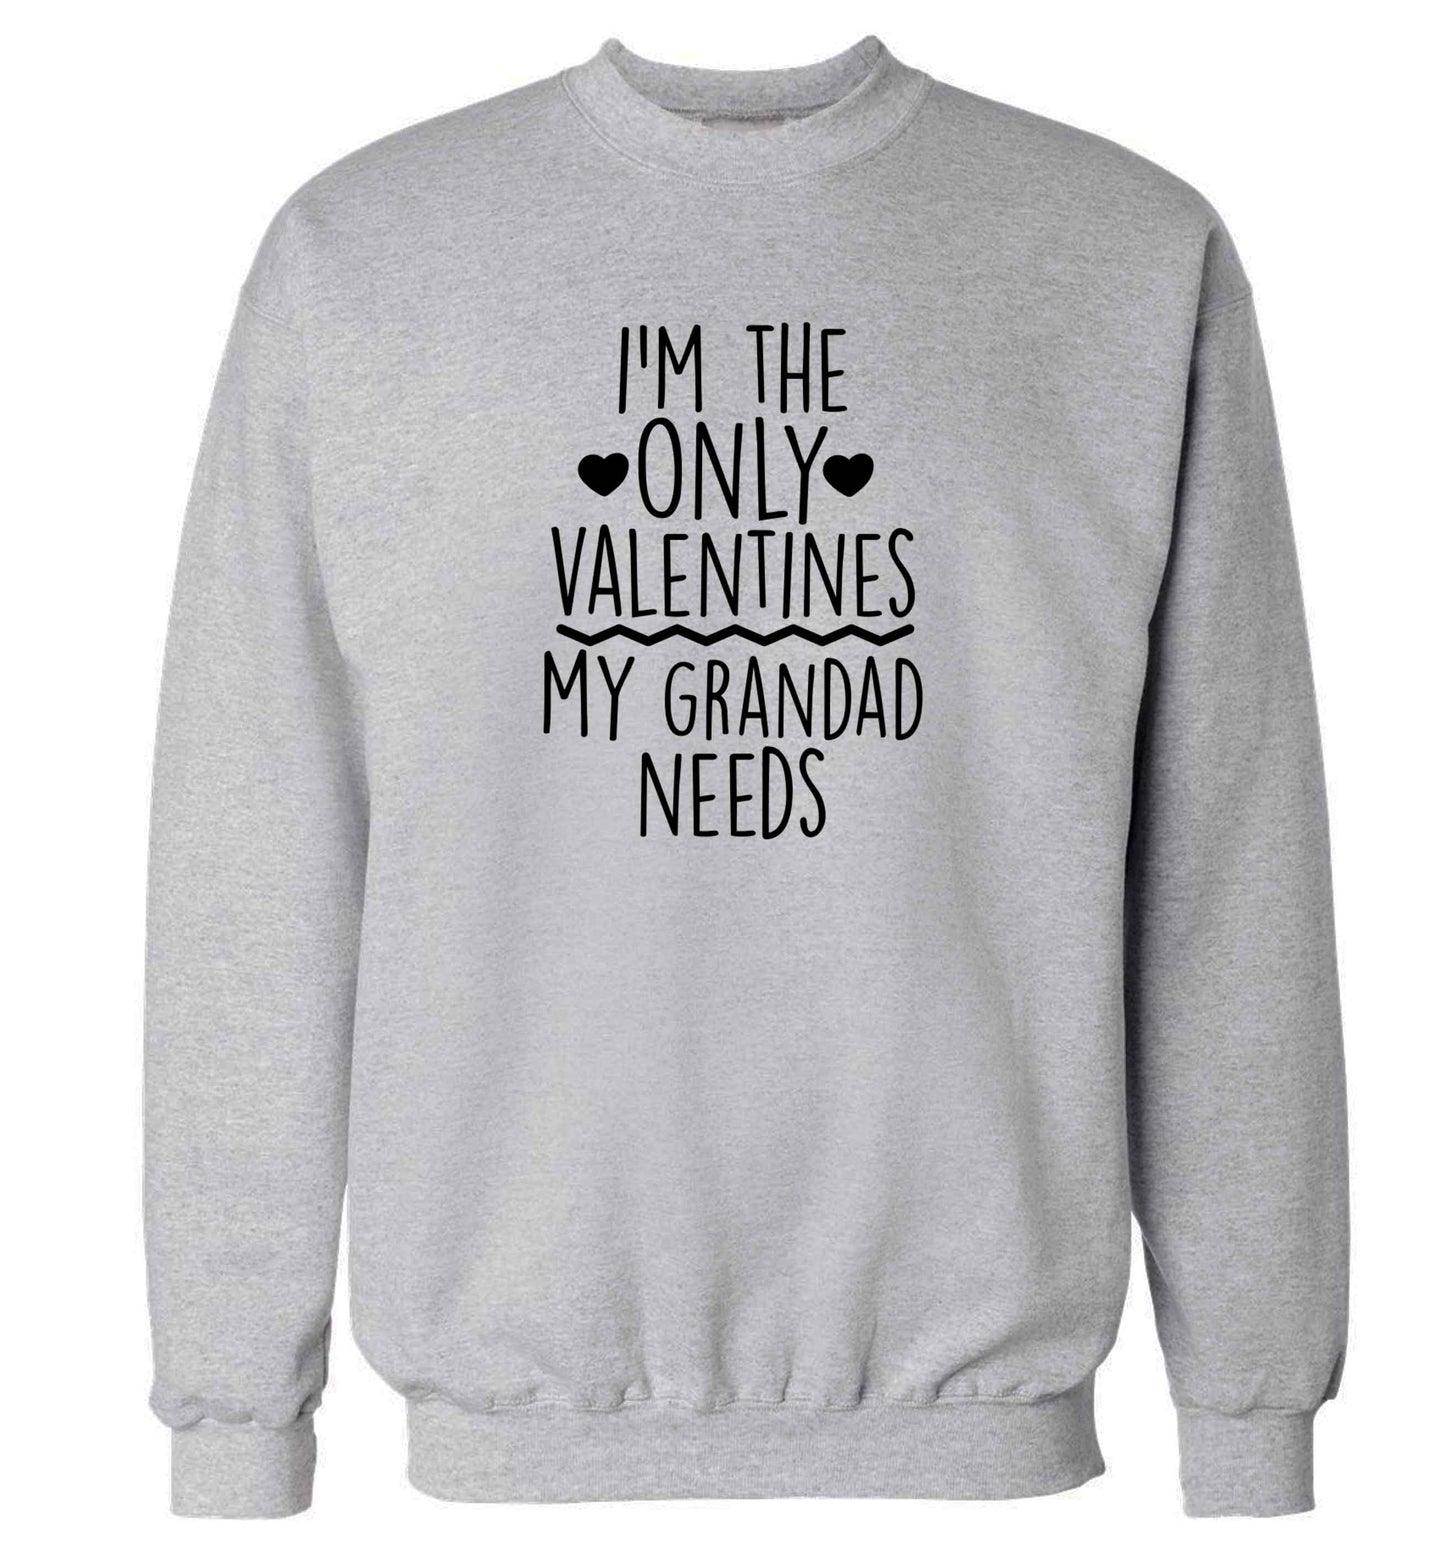 I'm the only valentines my grandad needs adult's unisex grey sweater 2XL